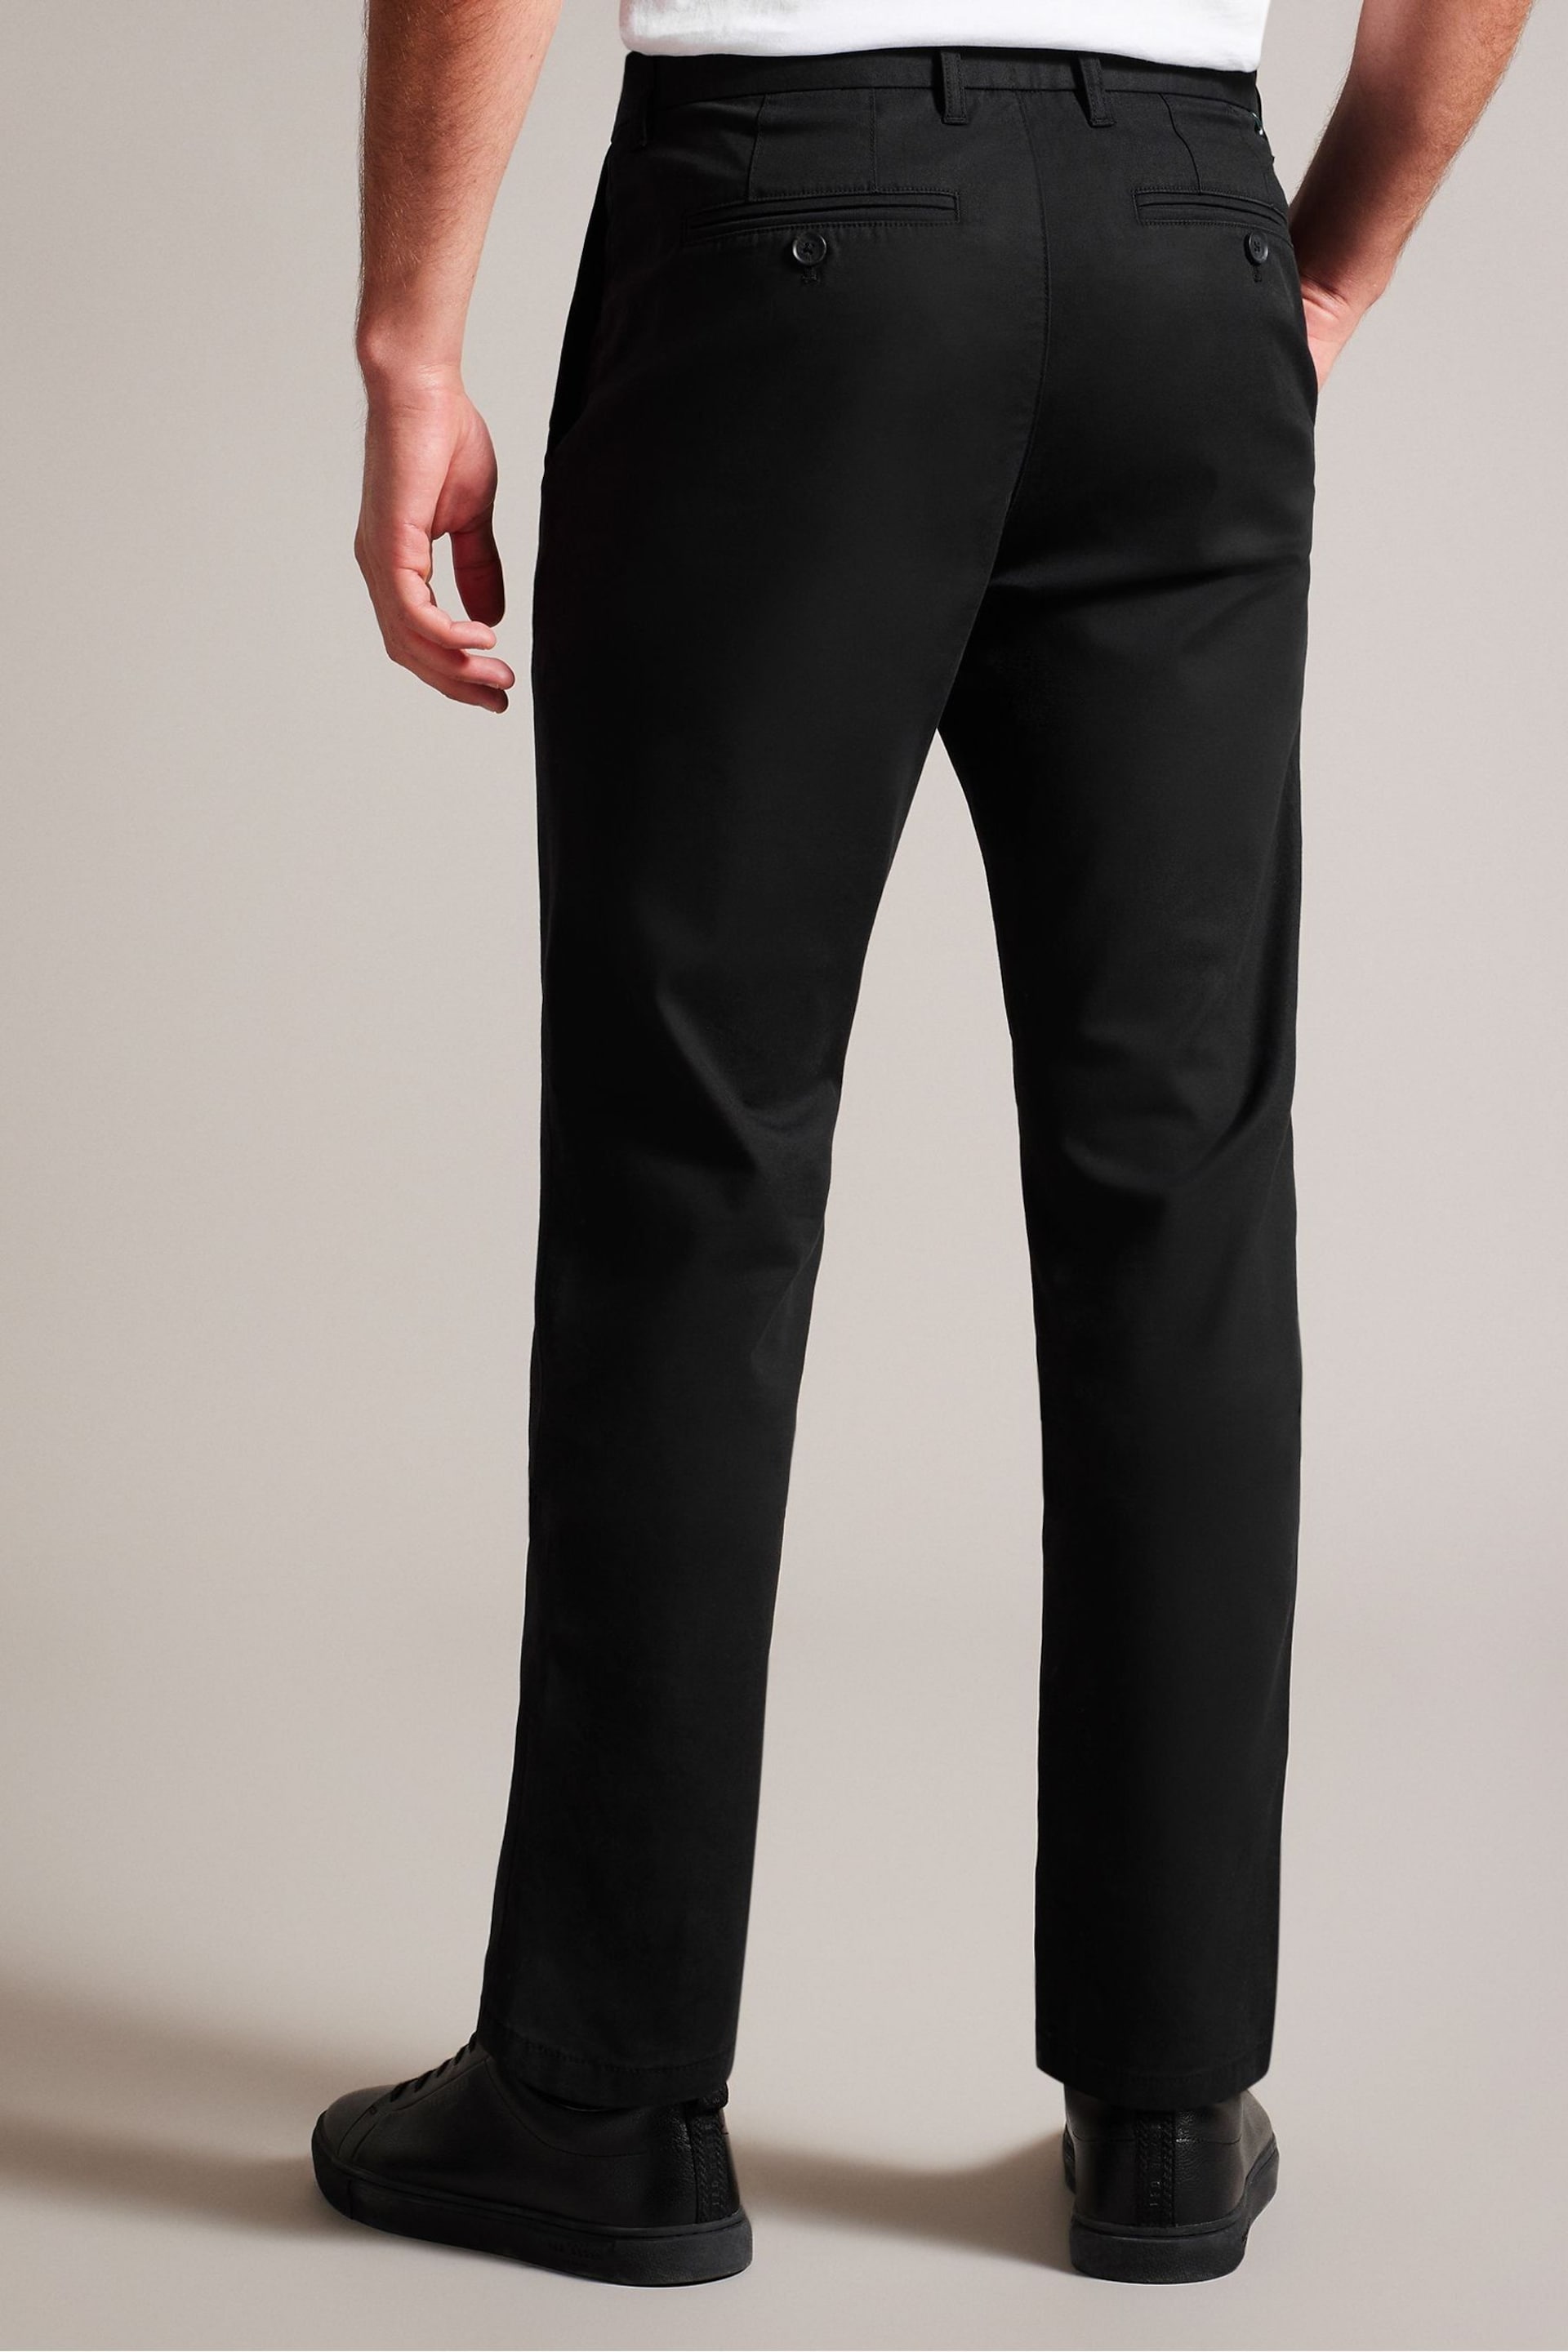 Ted Baker Black Slim Fit Haydae Textured Chino Trousers - Image 3 of 5